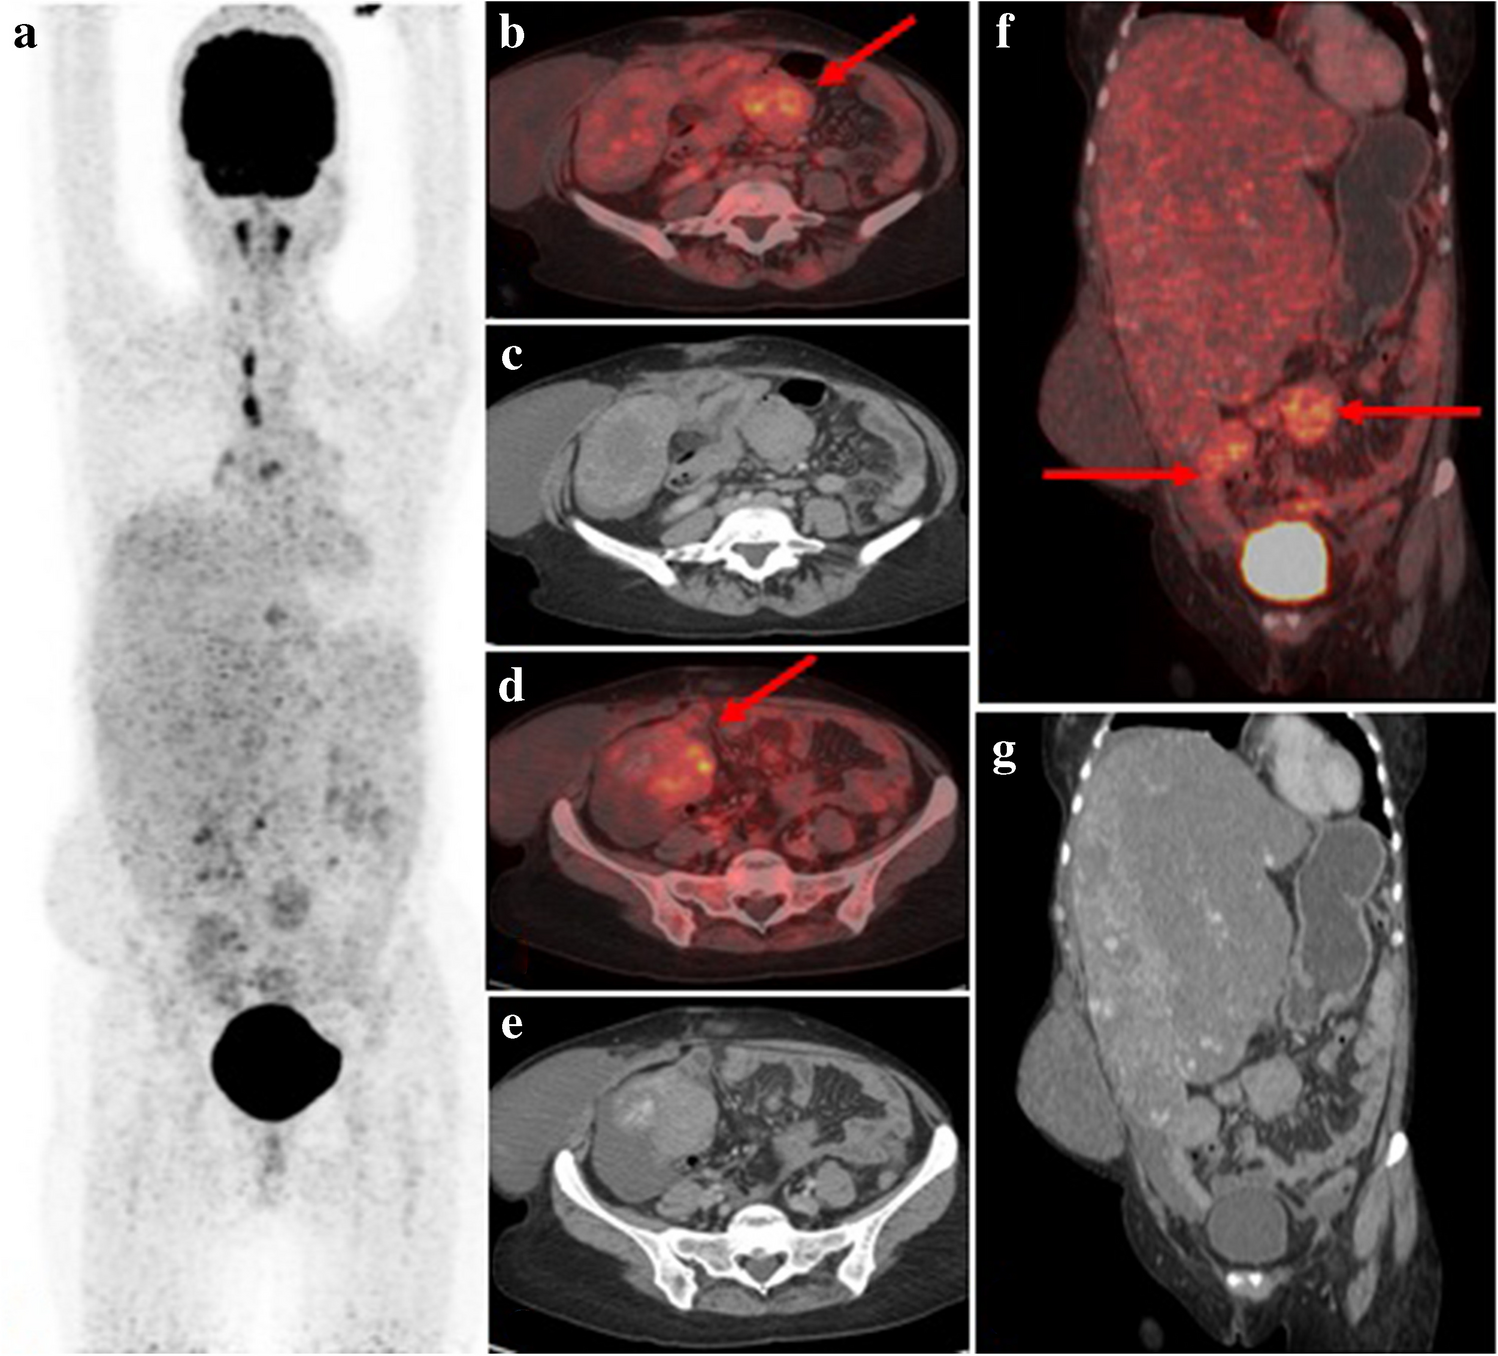 Annotating the Role of 18F-FDG PET/CT in Fibromatoses: A Benign Masquerader of Malignancies—Is It Really an Advantageous Tool?